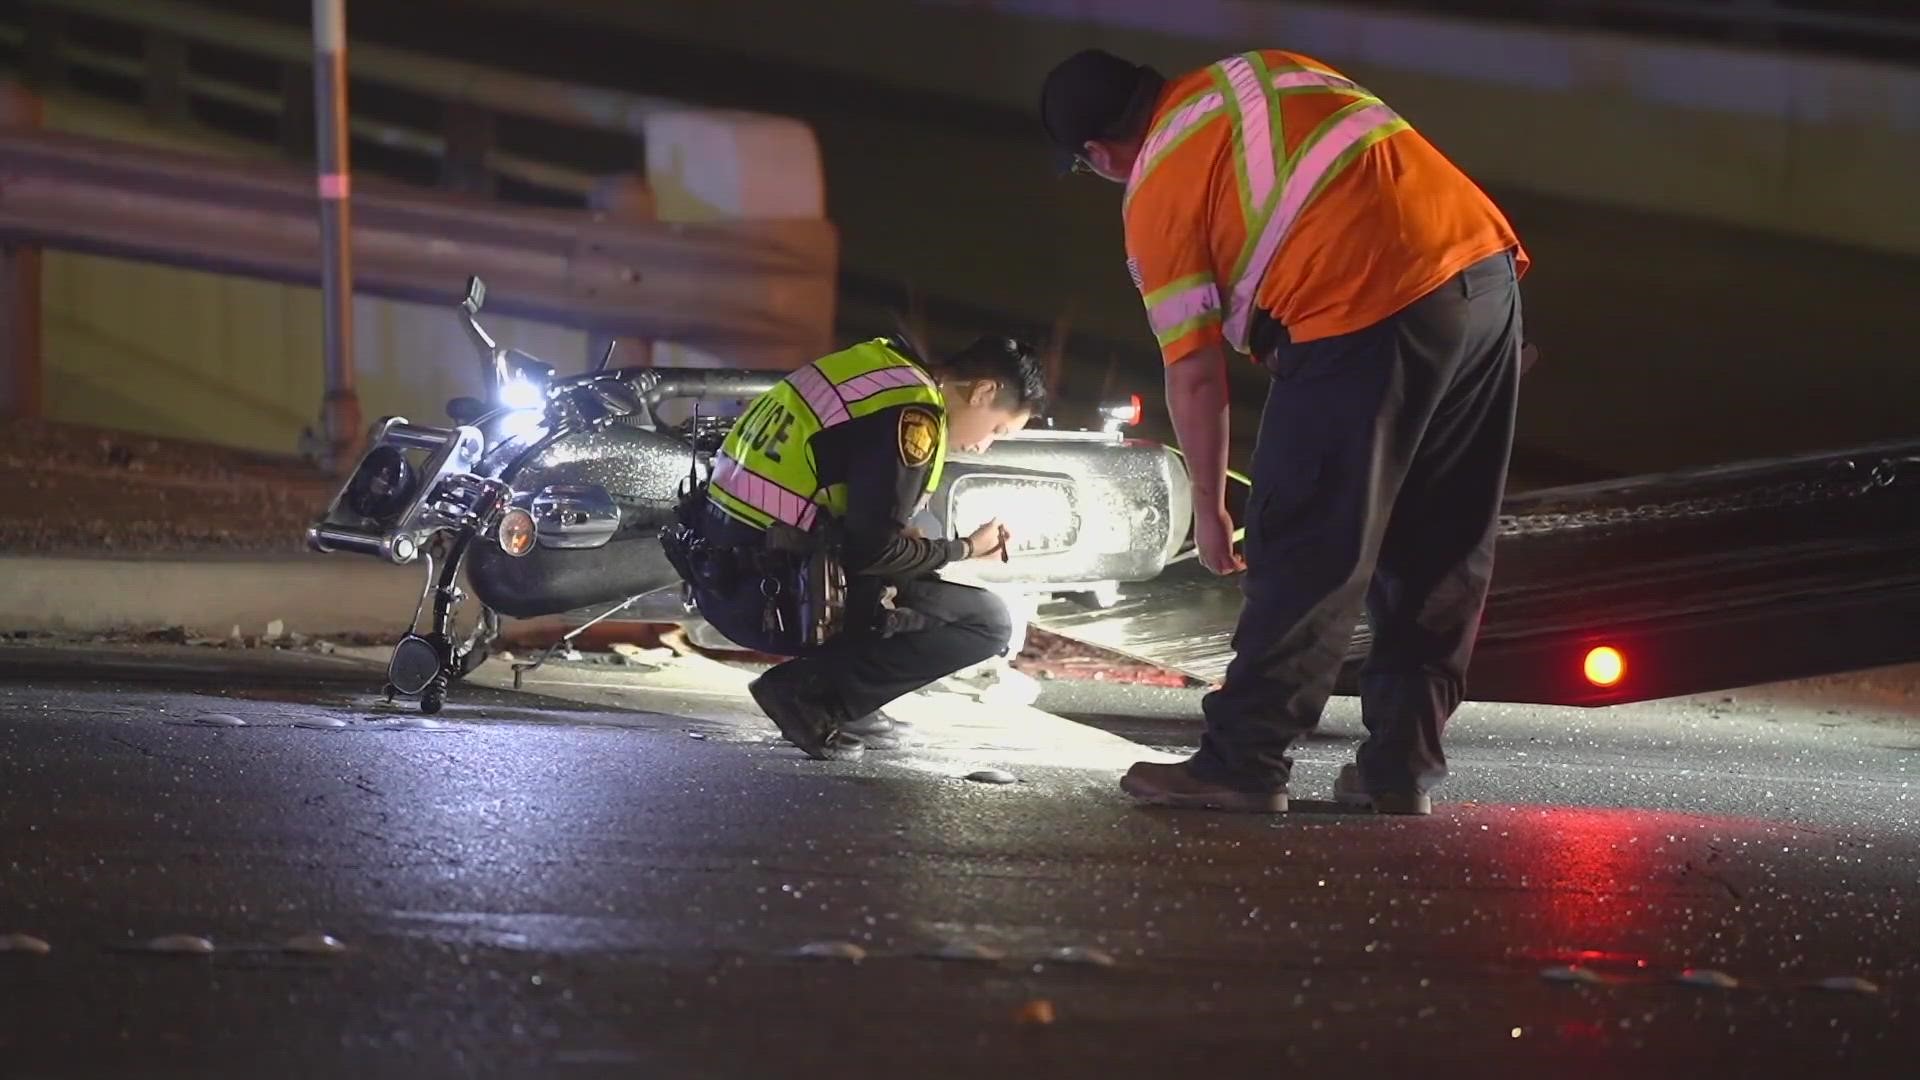 Police say that the motorcycle rider was possibly going at a high rate of speed when he collided with a vehicle at the intersection of Loop 1604 and Blanco.